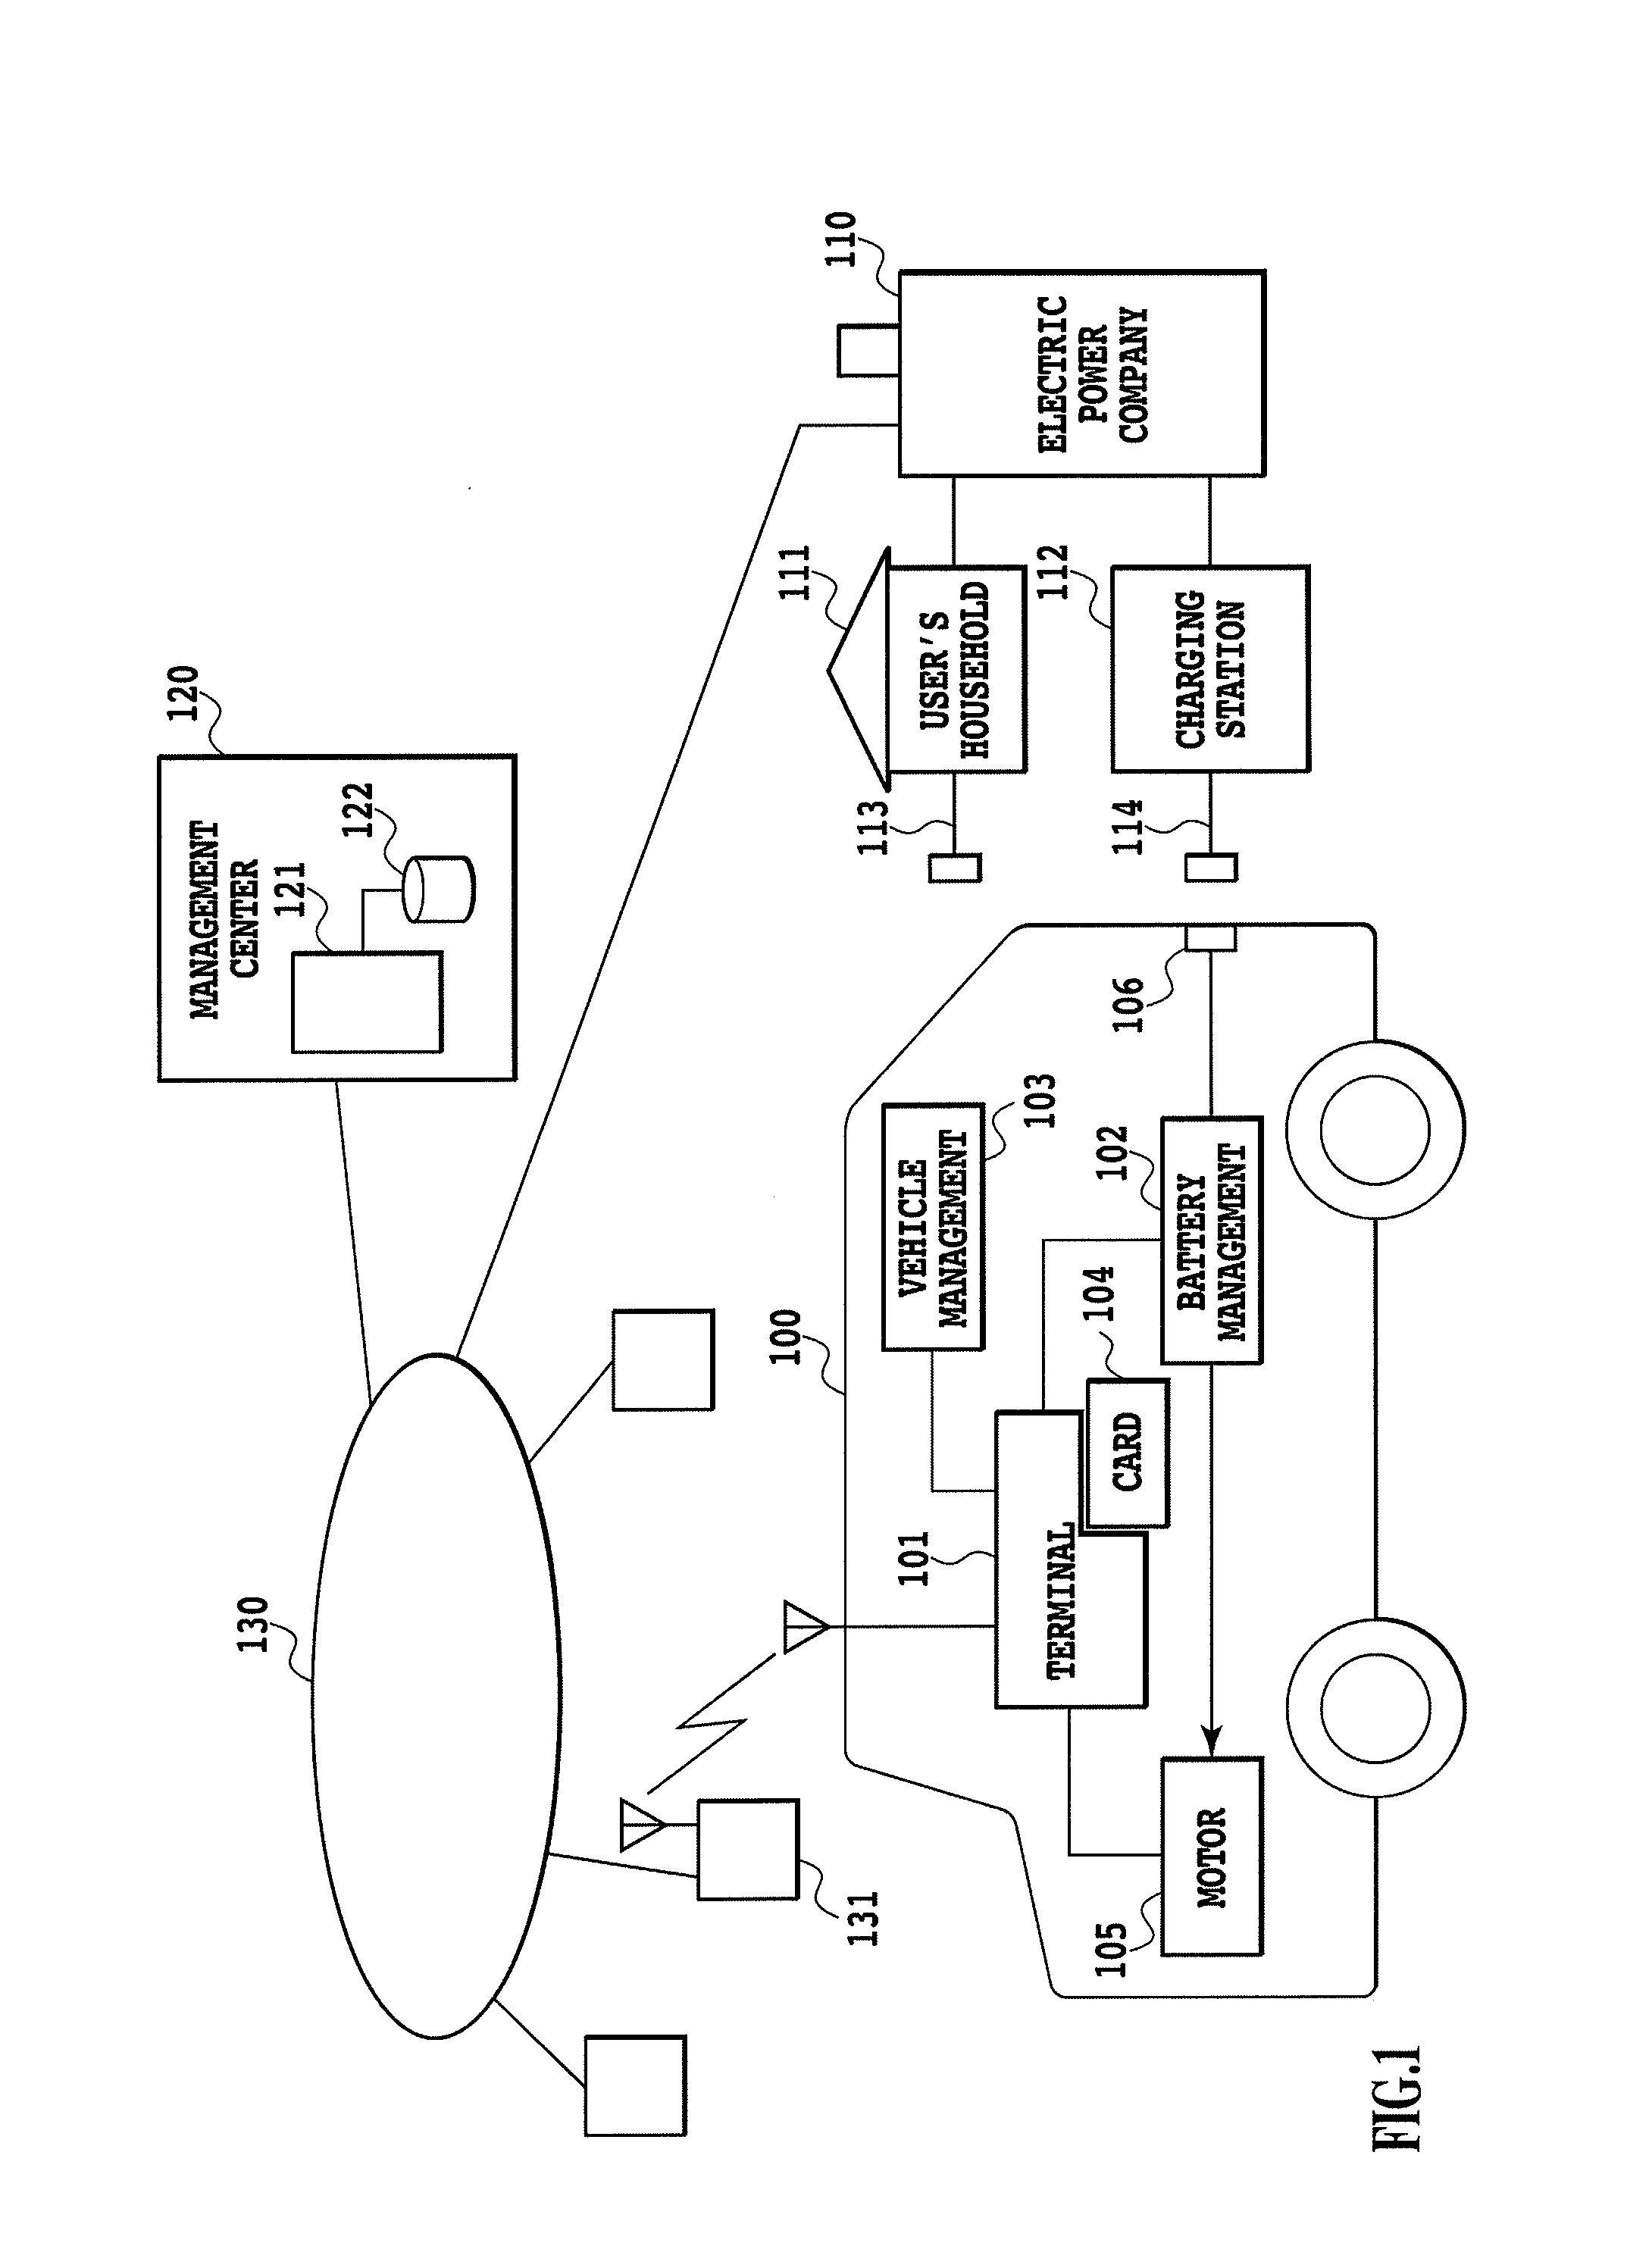 Electrically-driven apparatus charging system and method